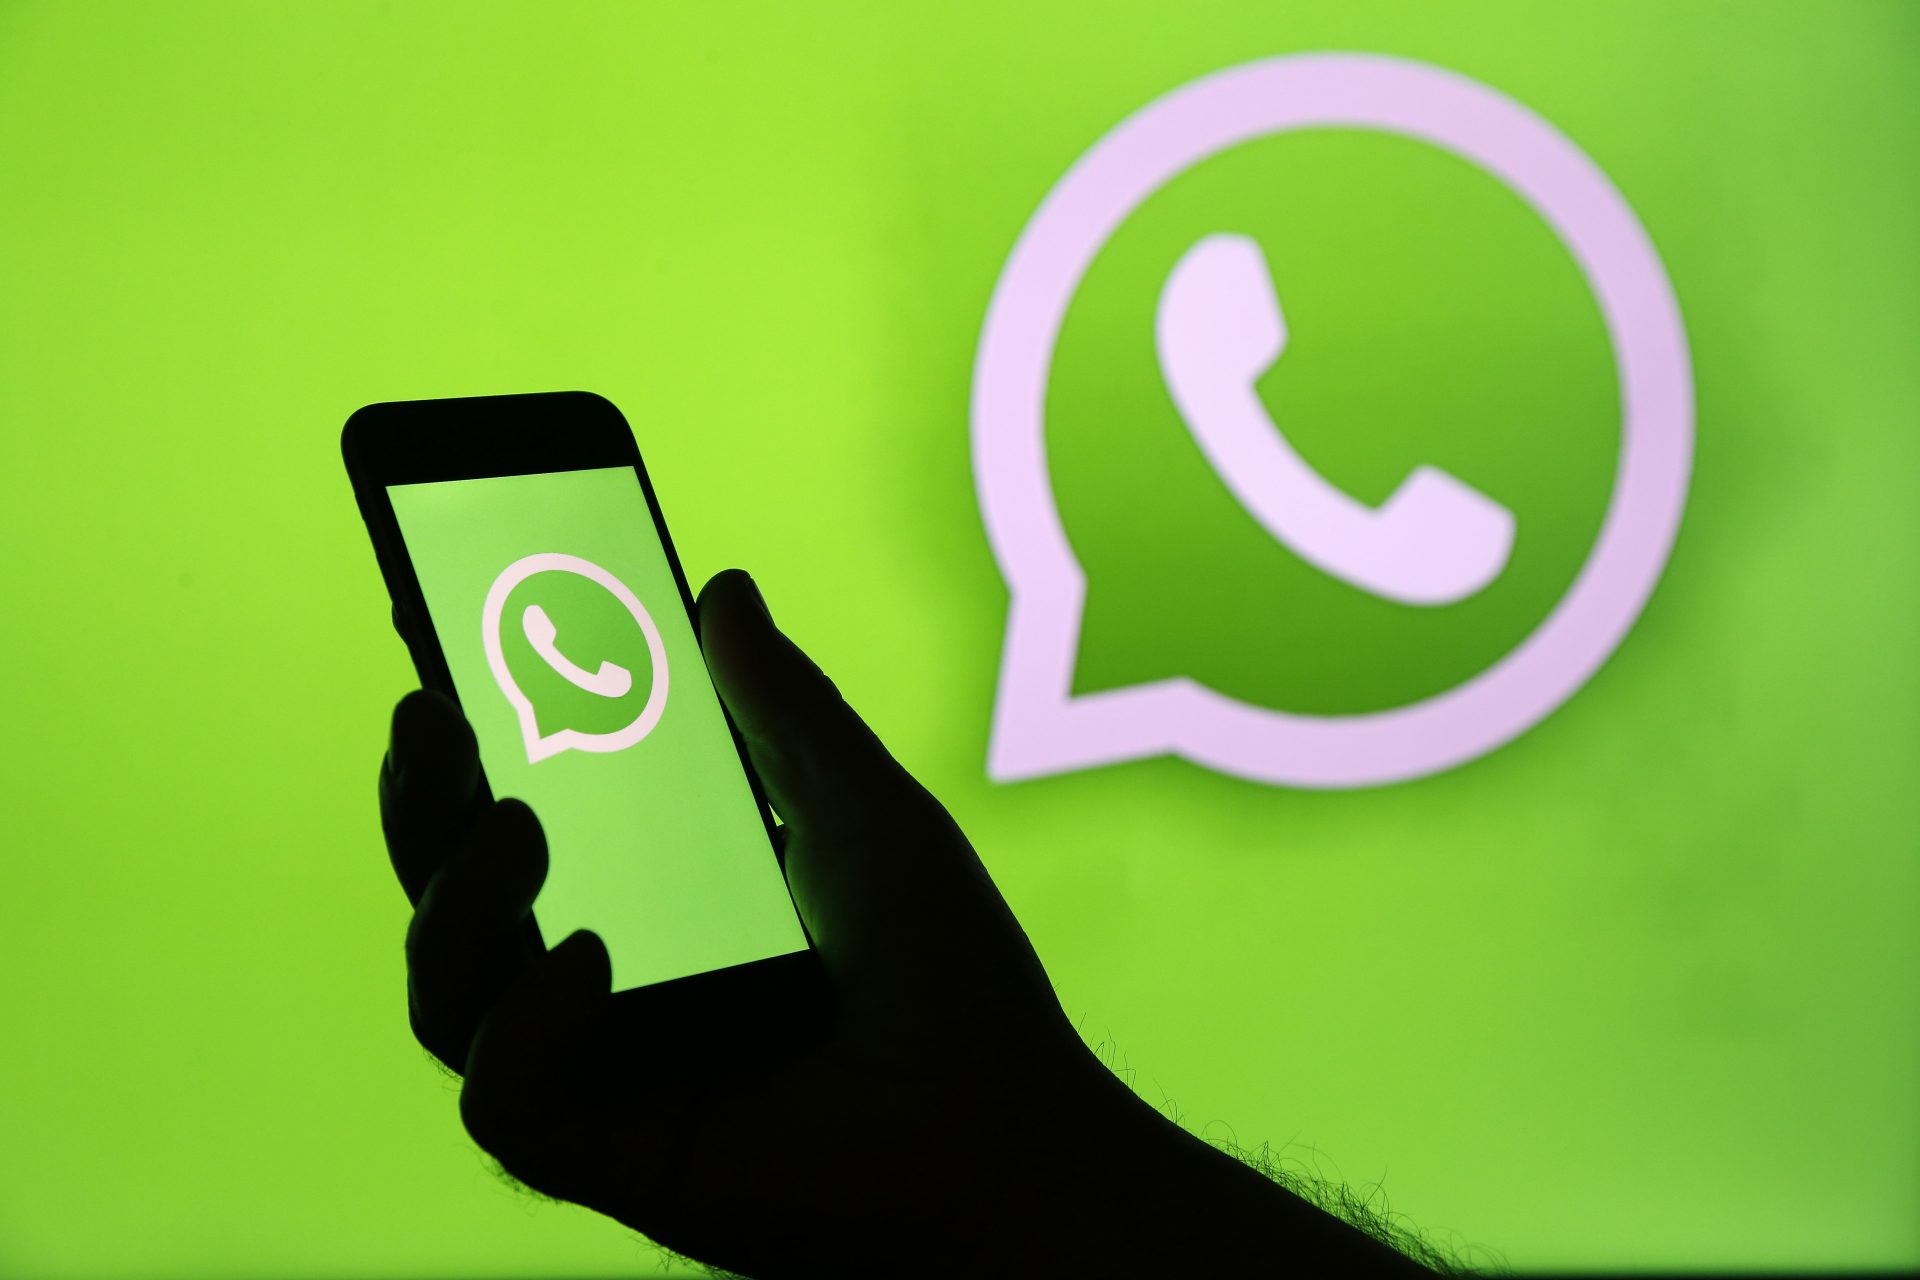 WhatsApp says NSO spyware was ragged to assault officials working for US allies